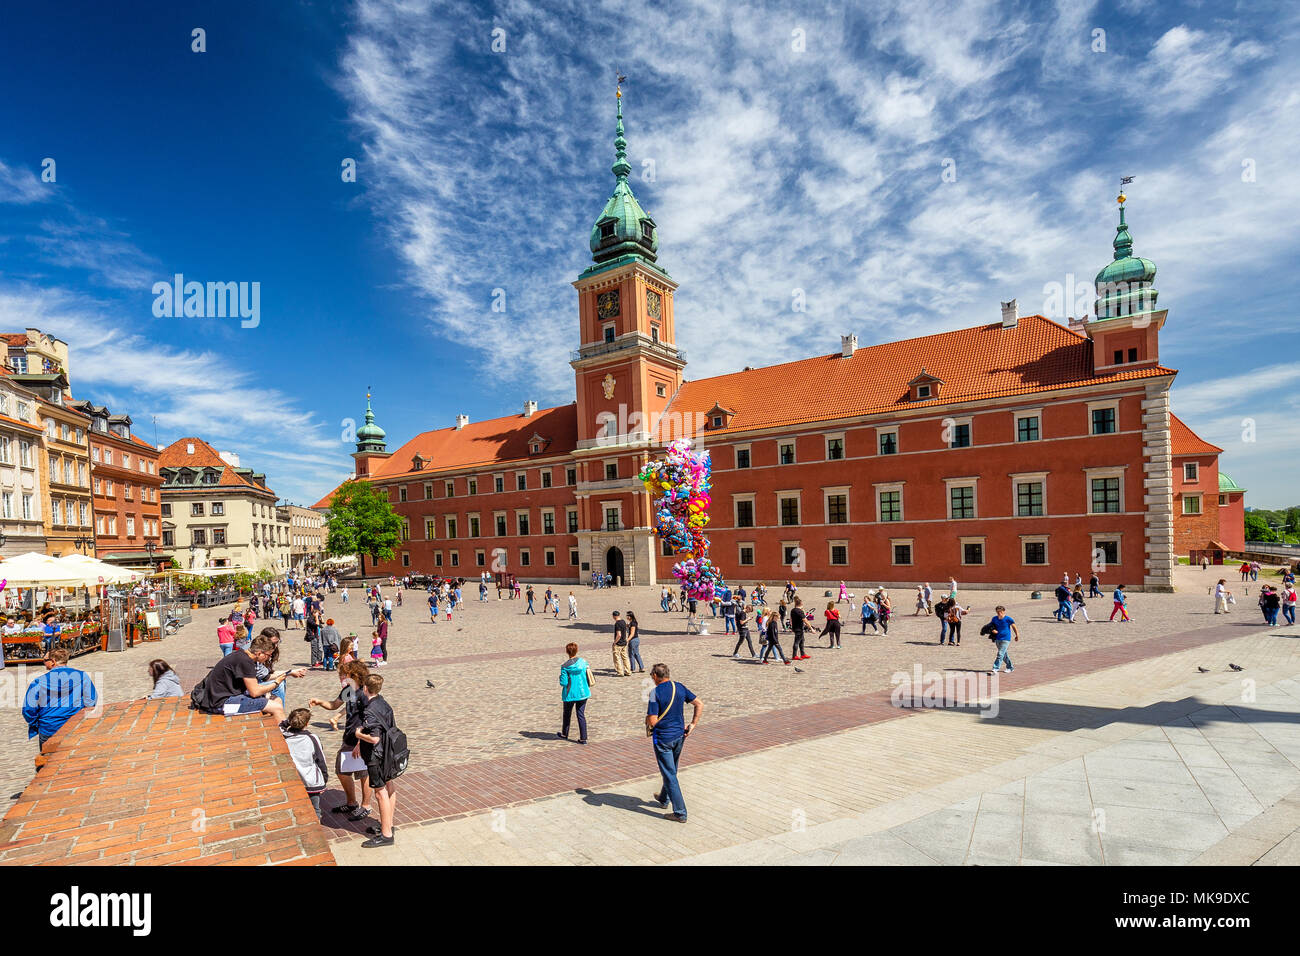 WARSAW, POLAND - 05.05.2018. Royal Castle at central square of polish capital - Warsaw. many tourists visit this town in sunny day. There are many his Stock Photo